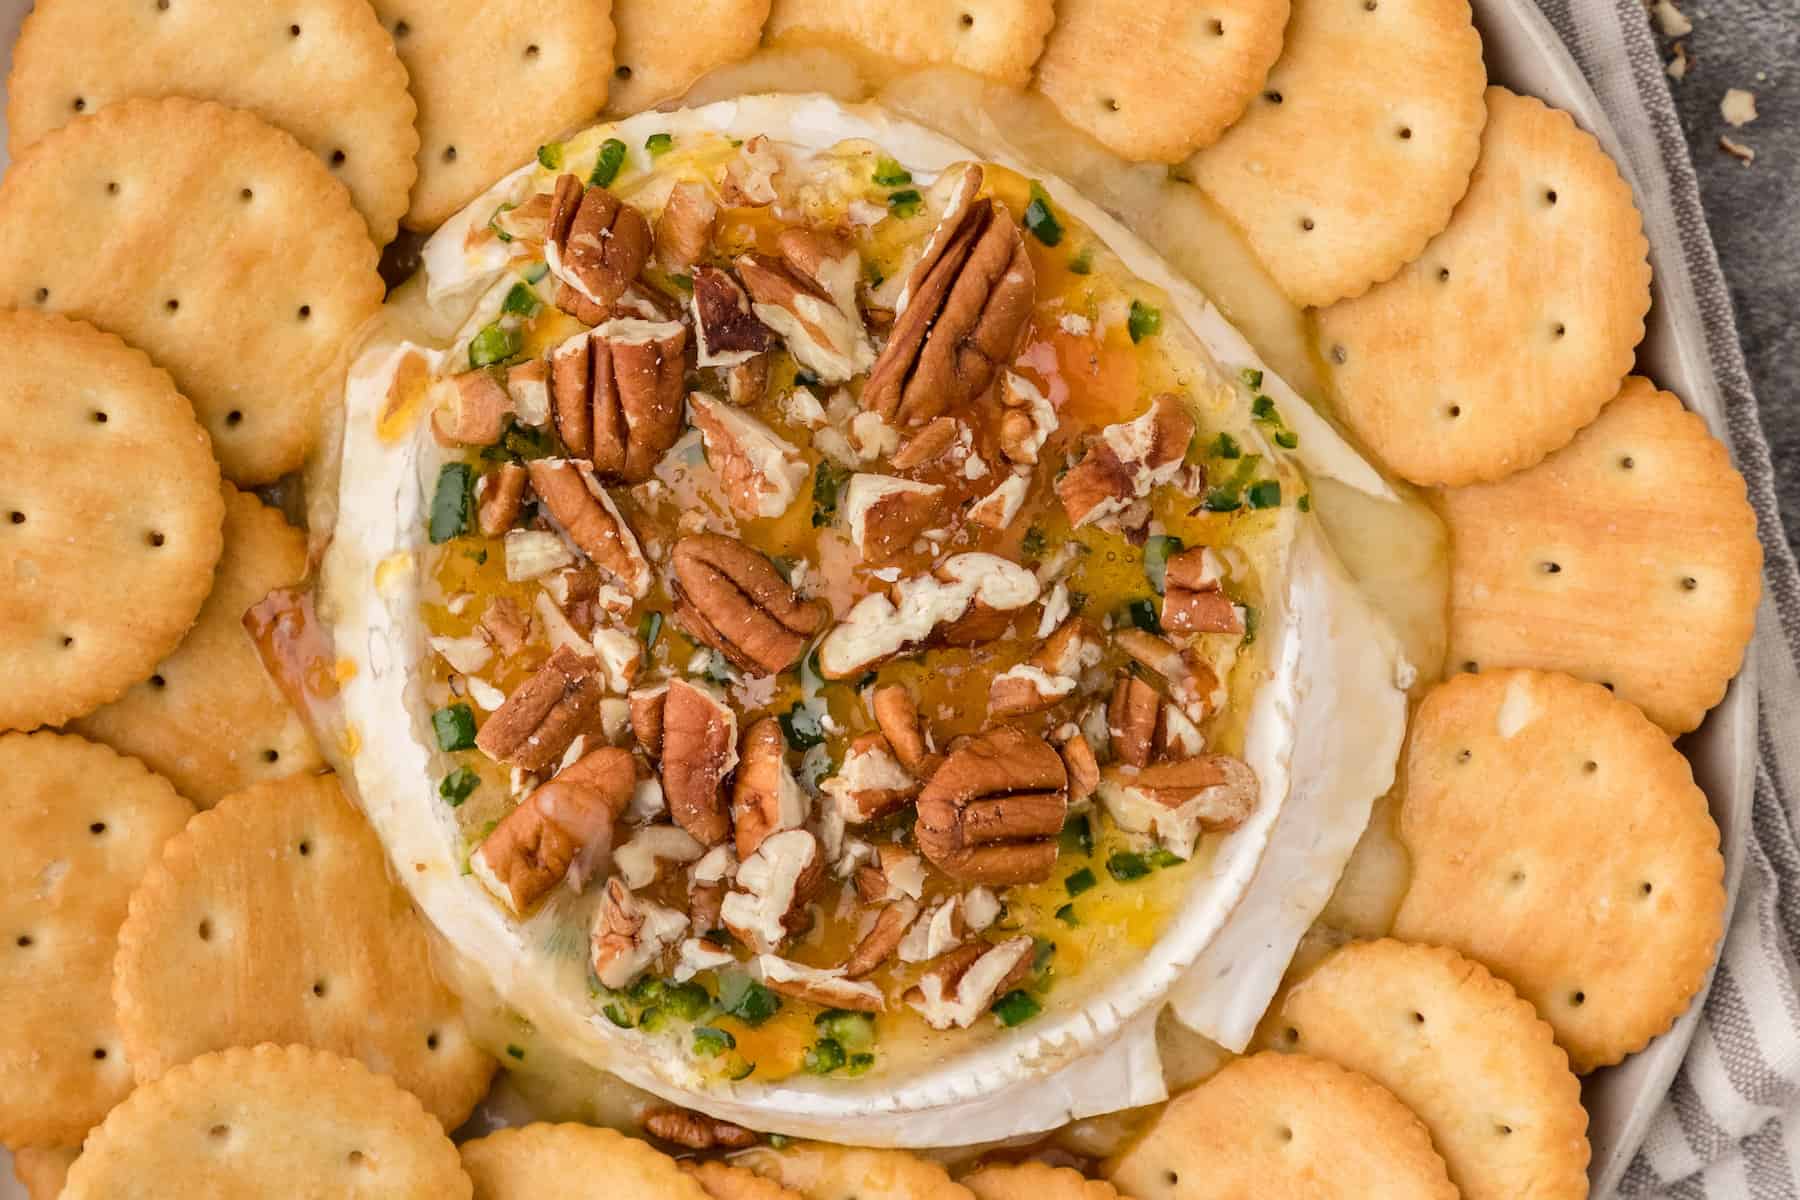 spicy baked brie with apricot jam, jalapeño peppers, and pecans surrounded by Ritz crackers